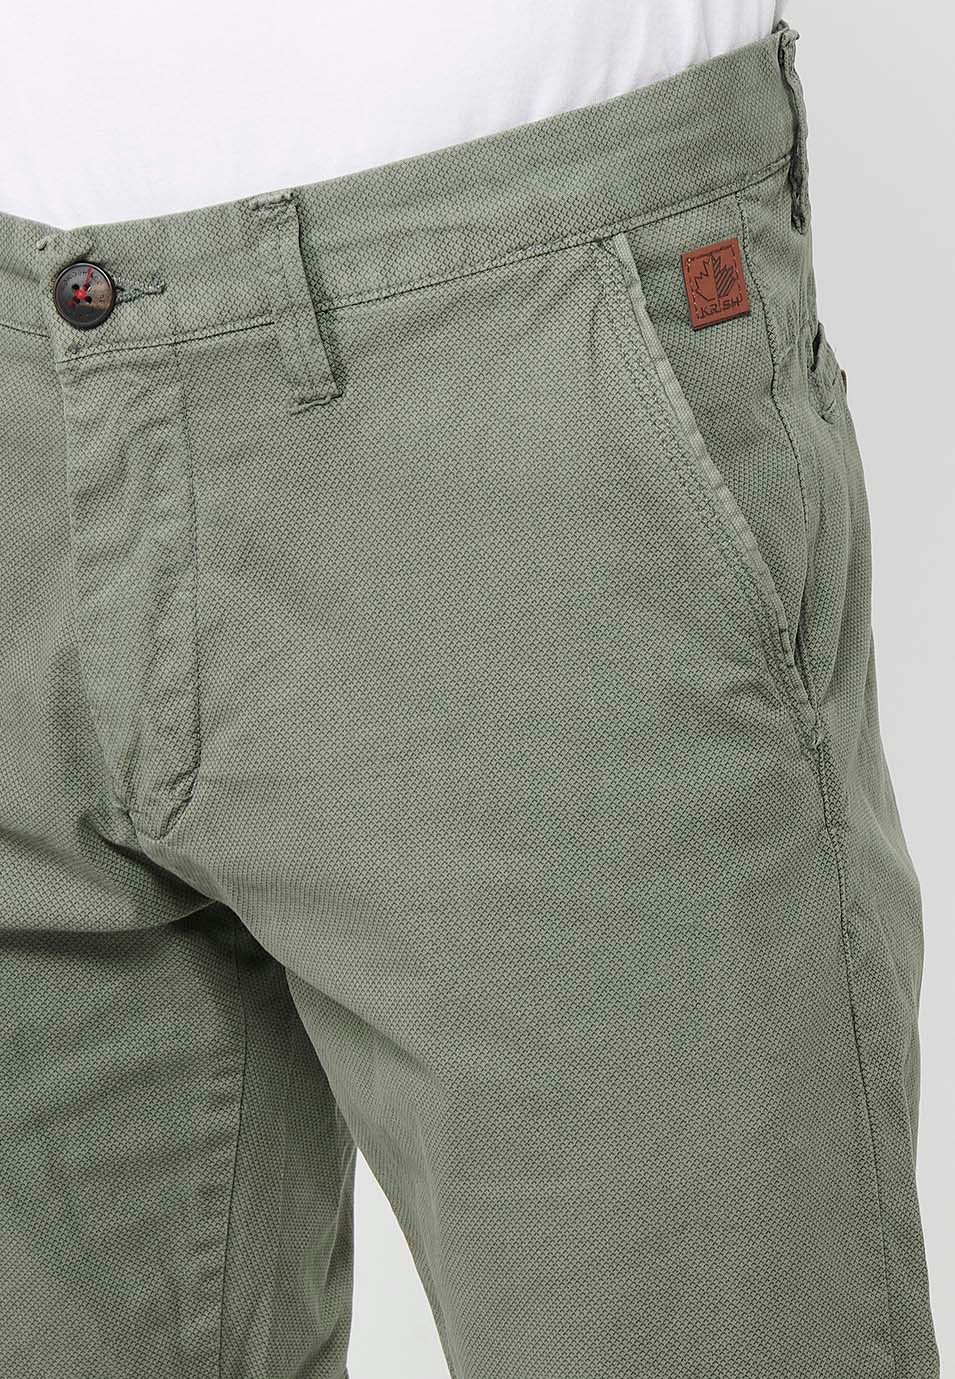 Bermuda Chino Shorts with Turn-Up Finish with Front Zipper and Button Closure with Four Pockets in Green Color for Men 6